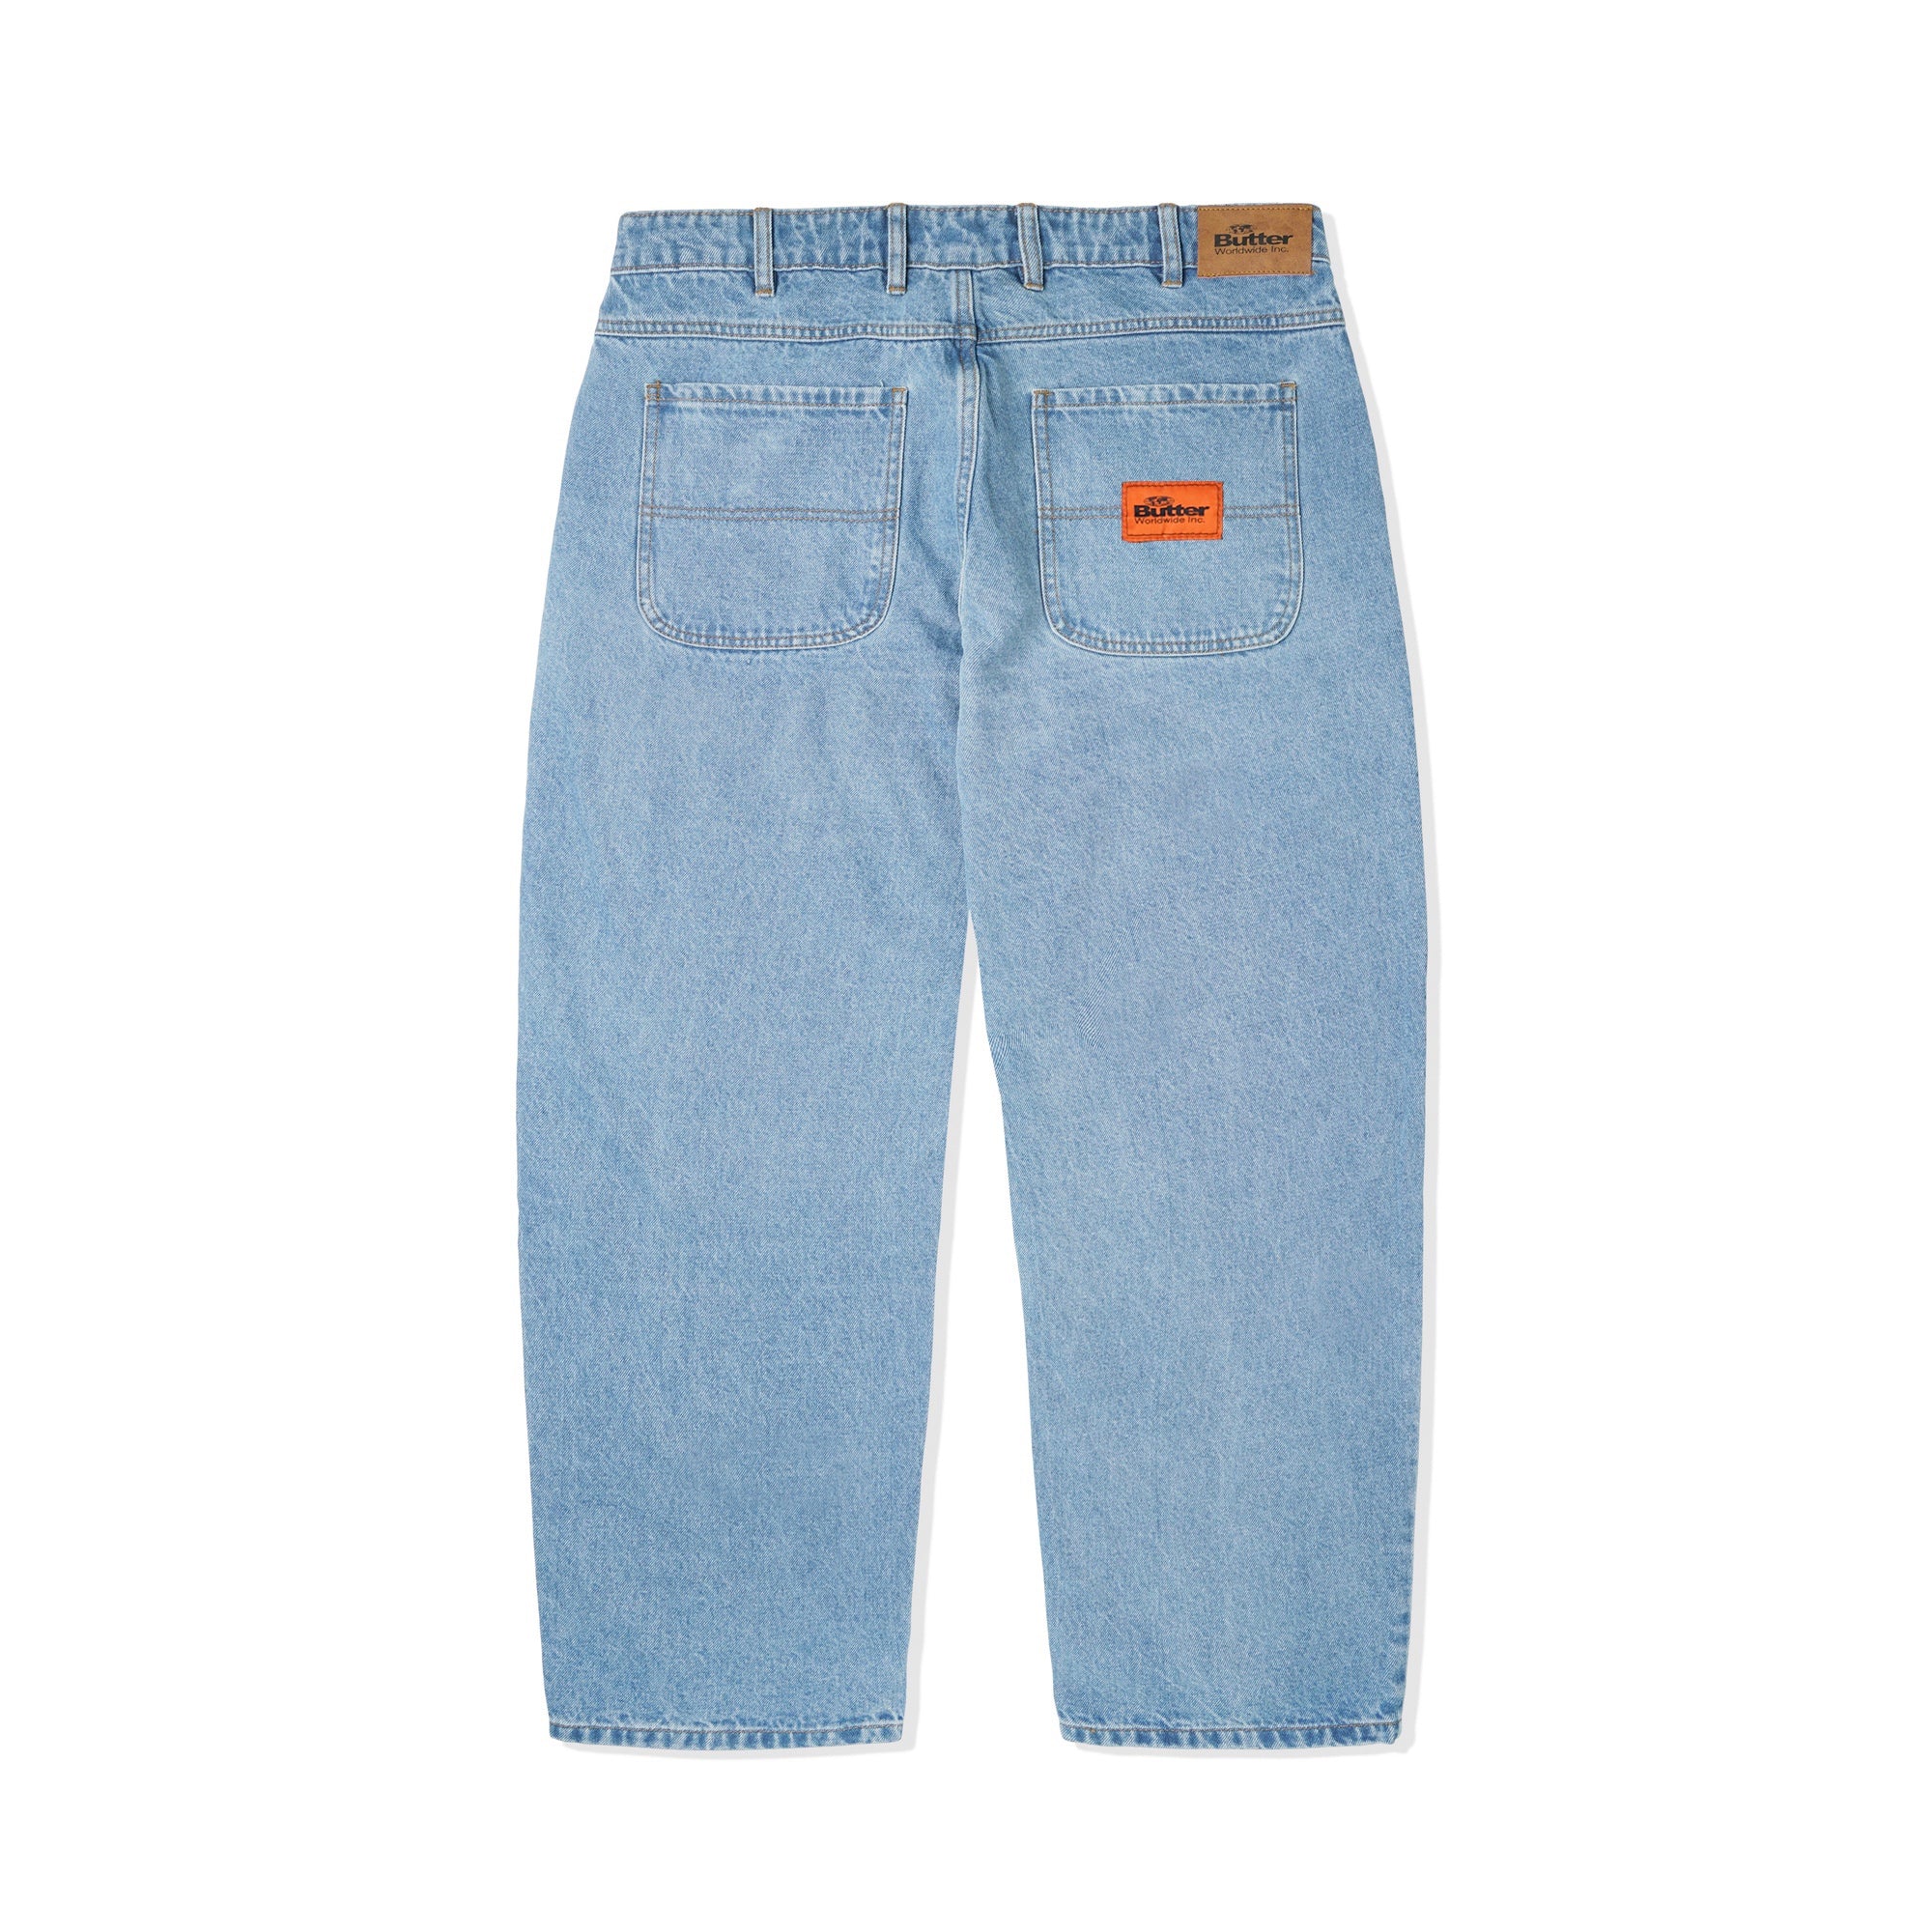 Butter Goods Philly Santosuosso Denim Pants - (Washed Blue)